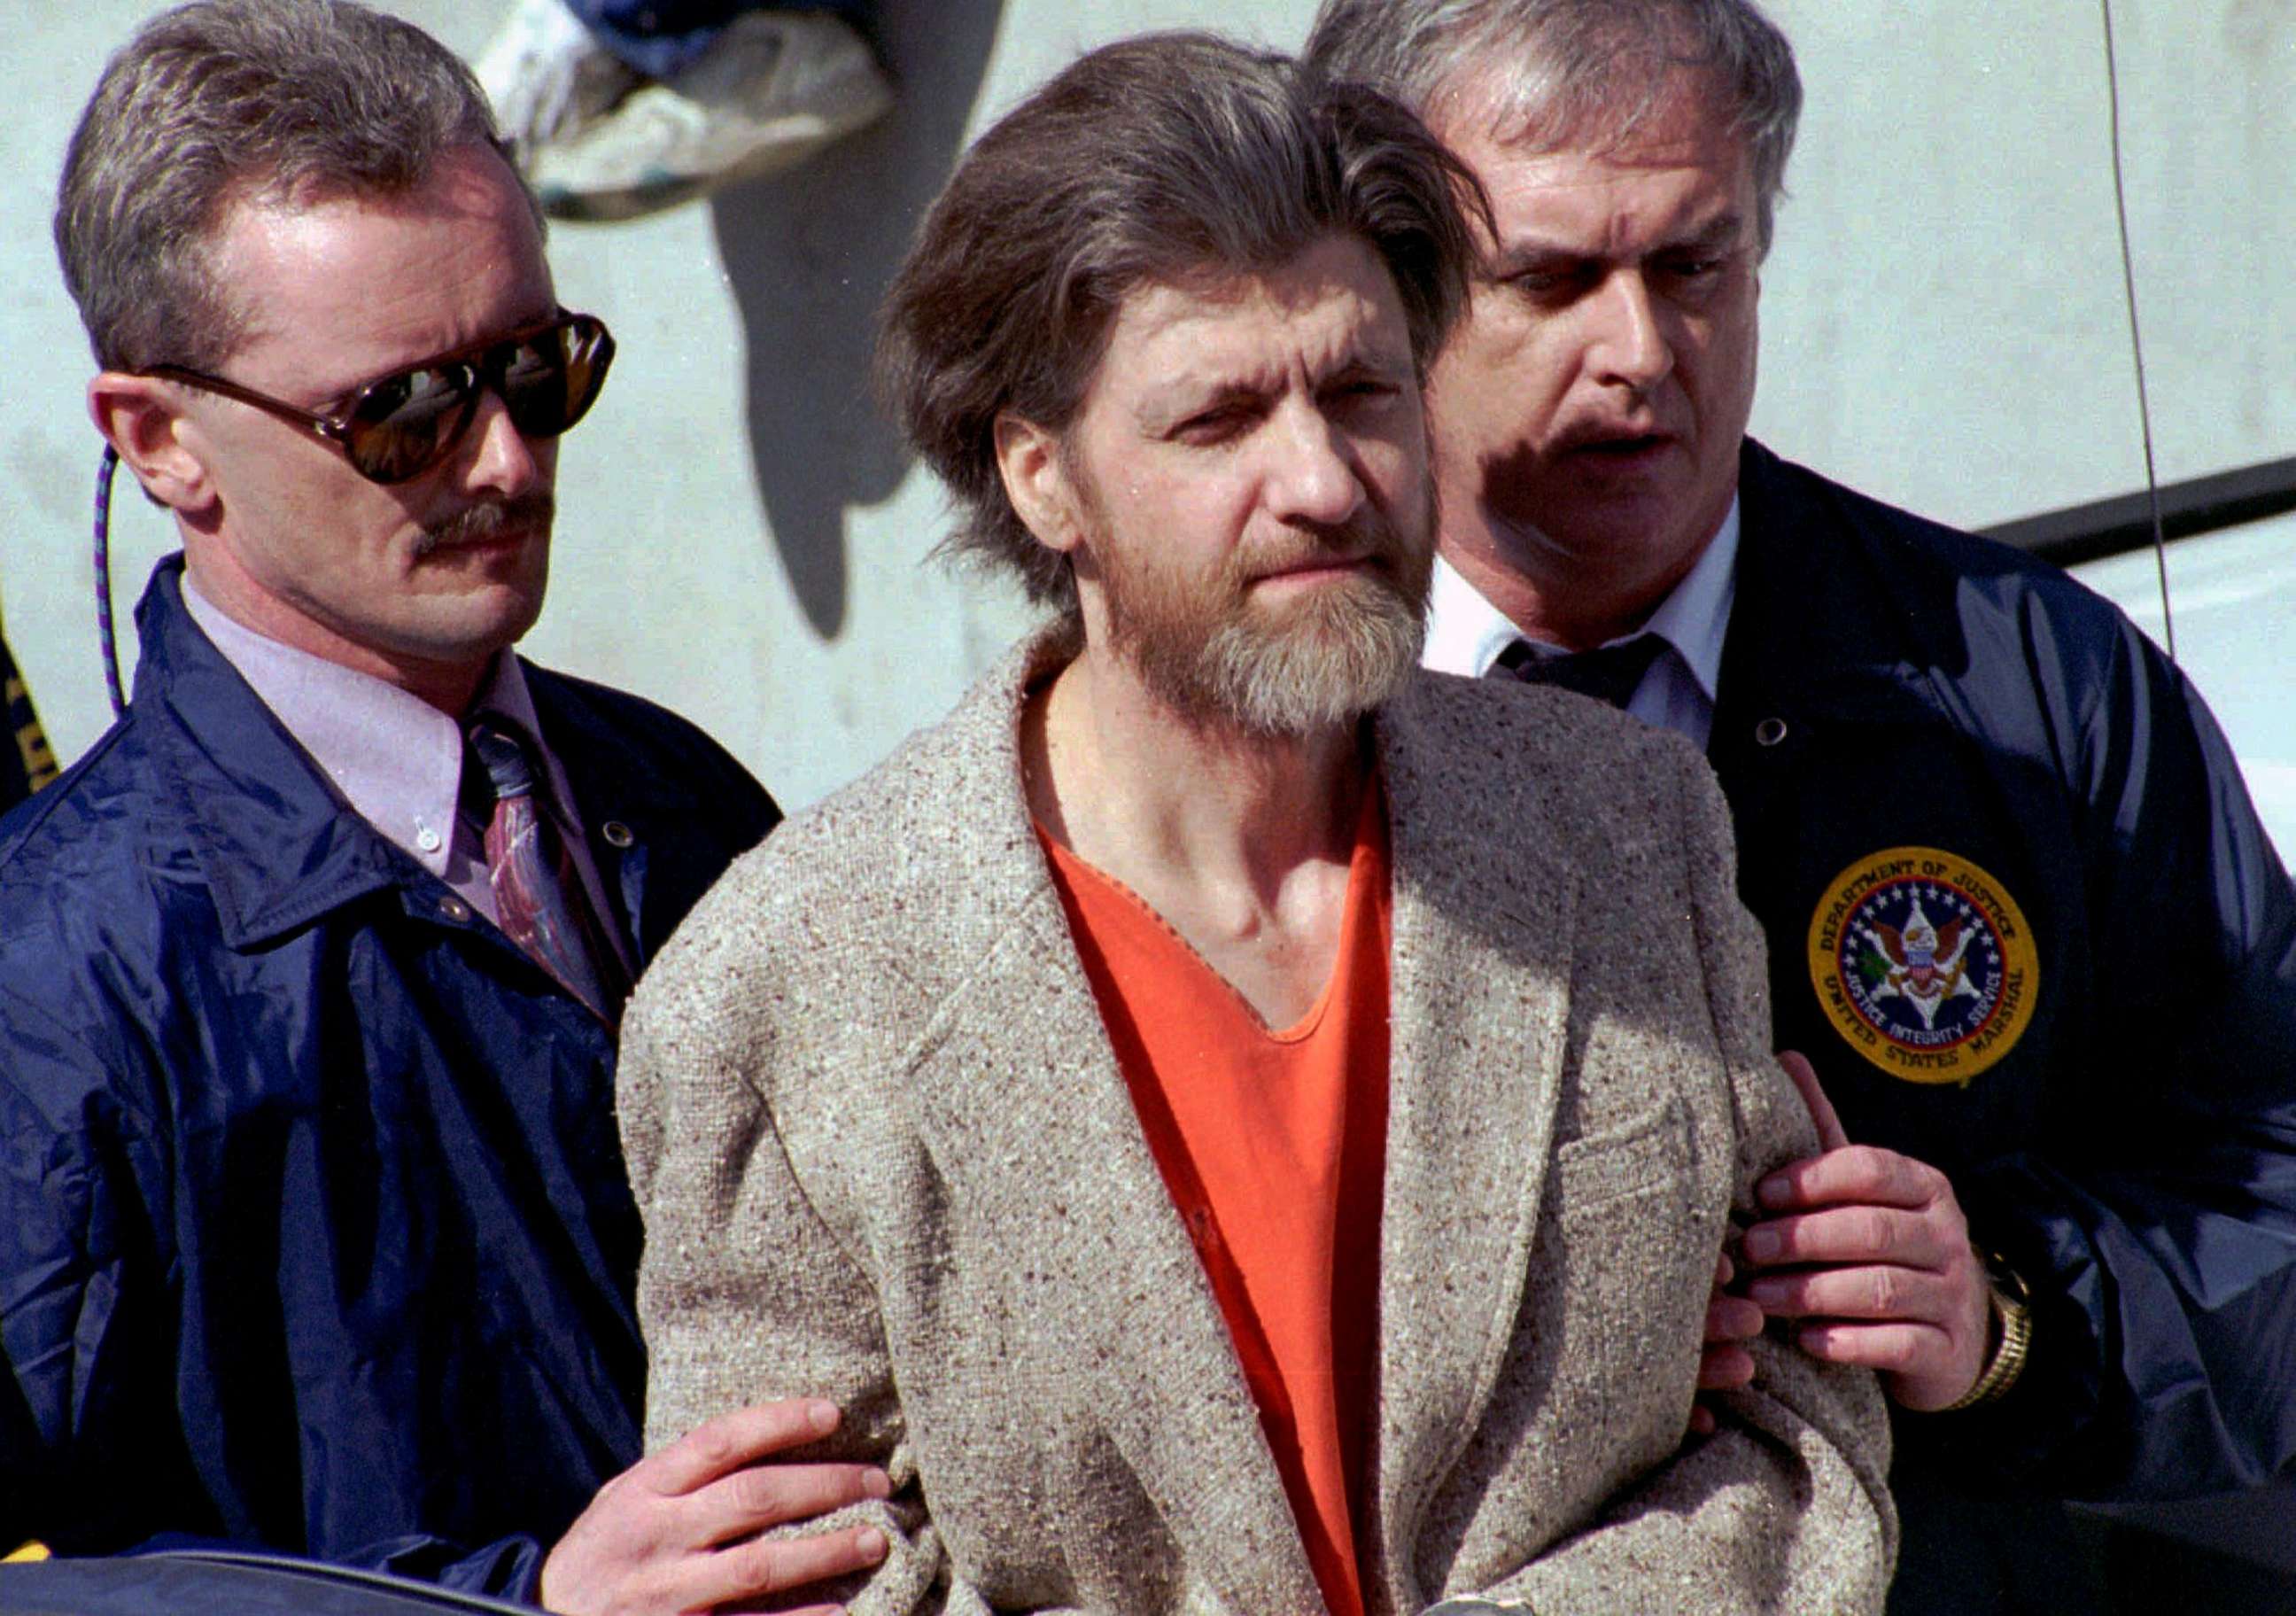 PHOTO: In this April 4, 1996 file photo, Ted Kaczynski, better known as the Unabomber, is flanked by federal agents as he is led to a car from the federal courthouse in Helena, Mont.